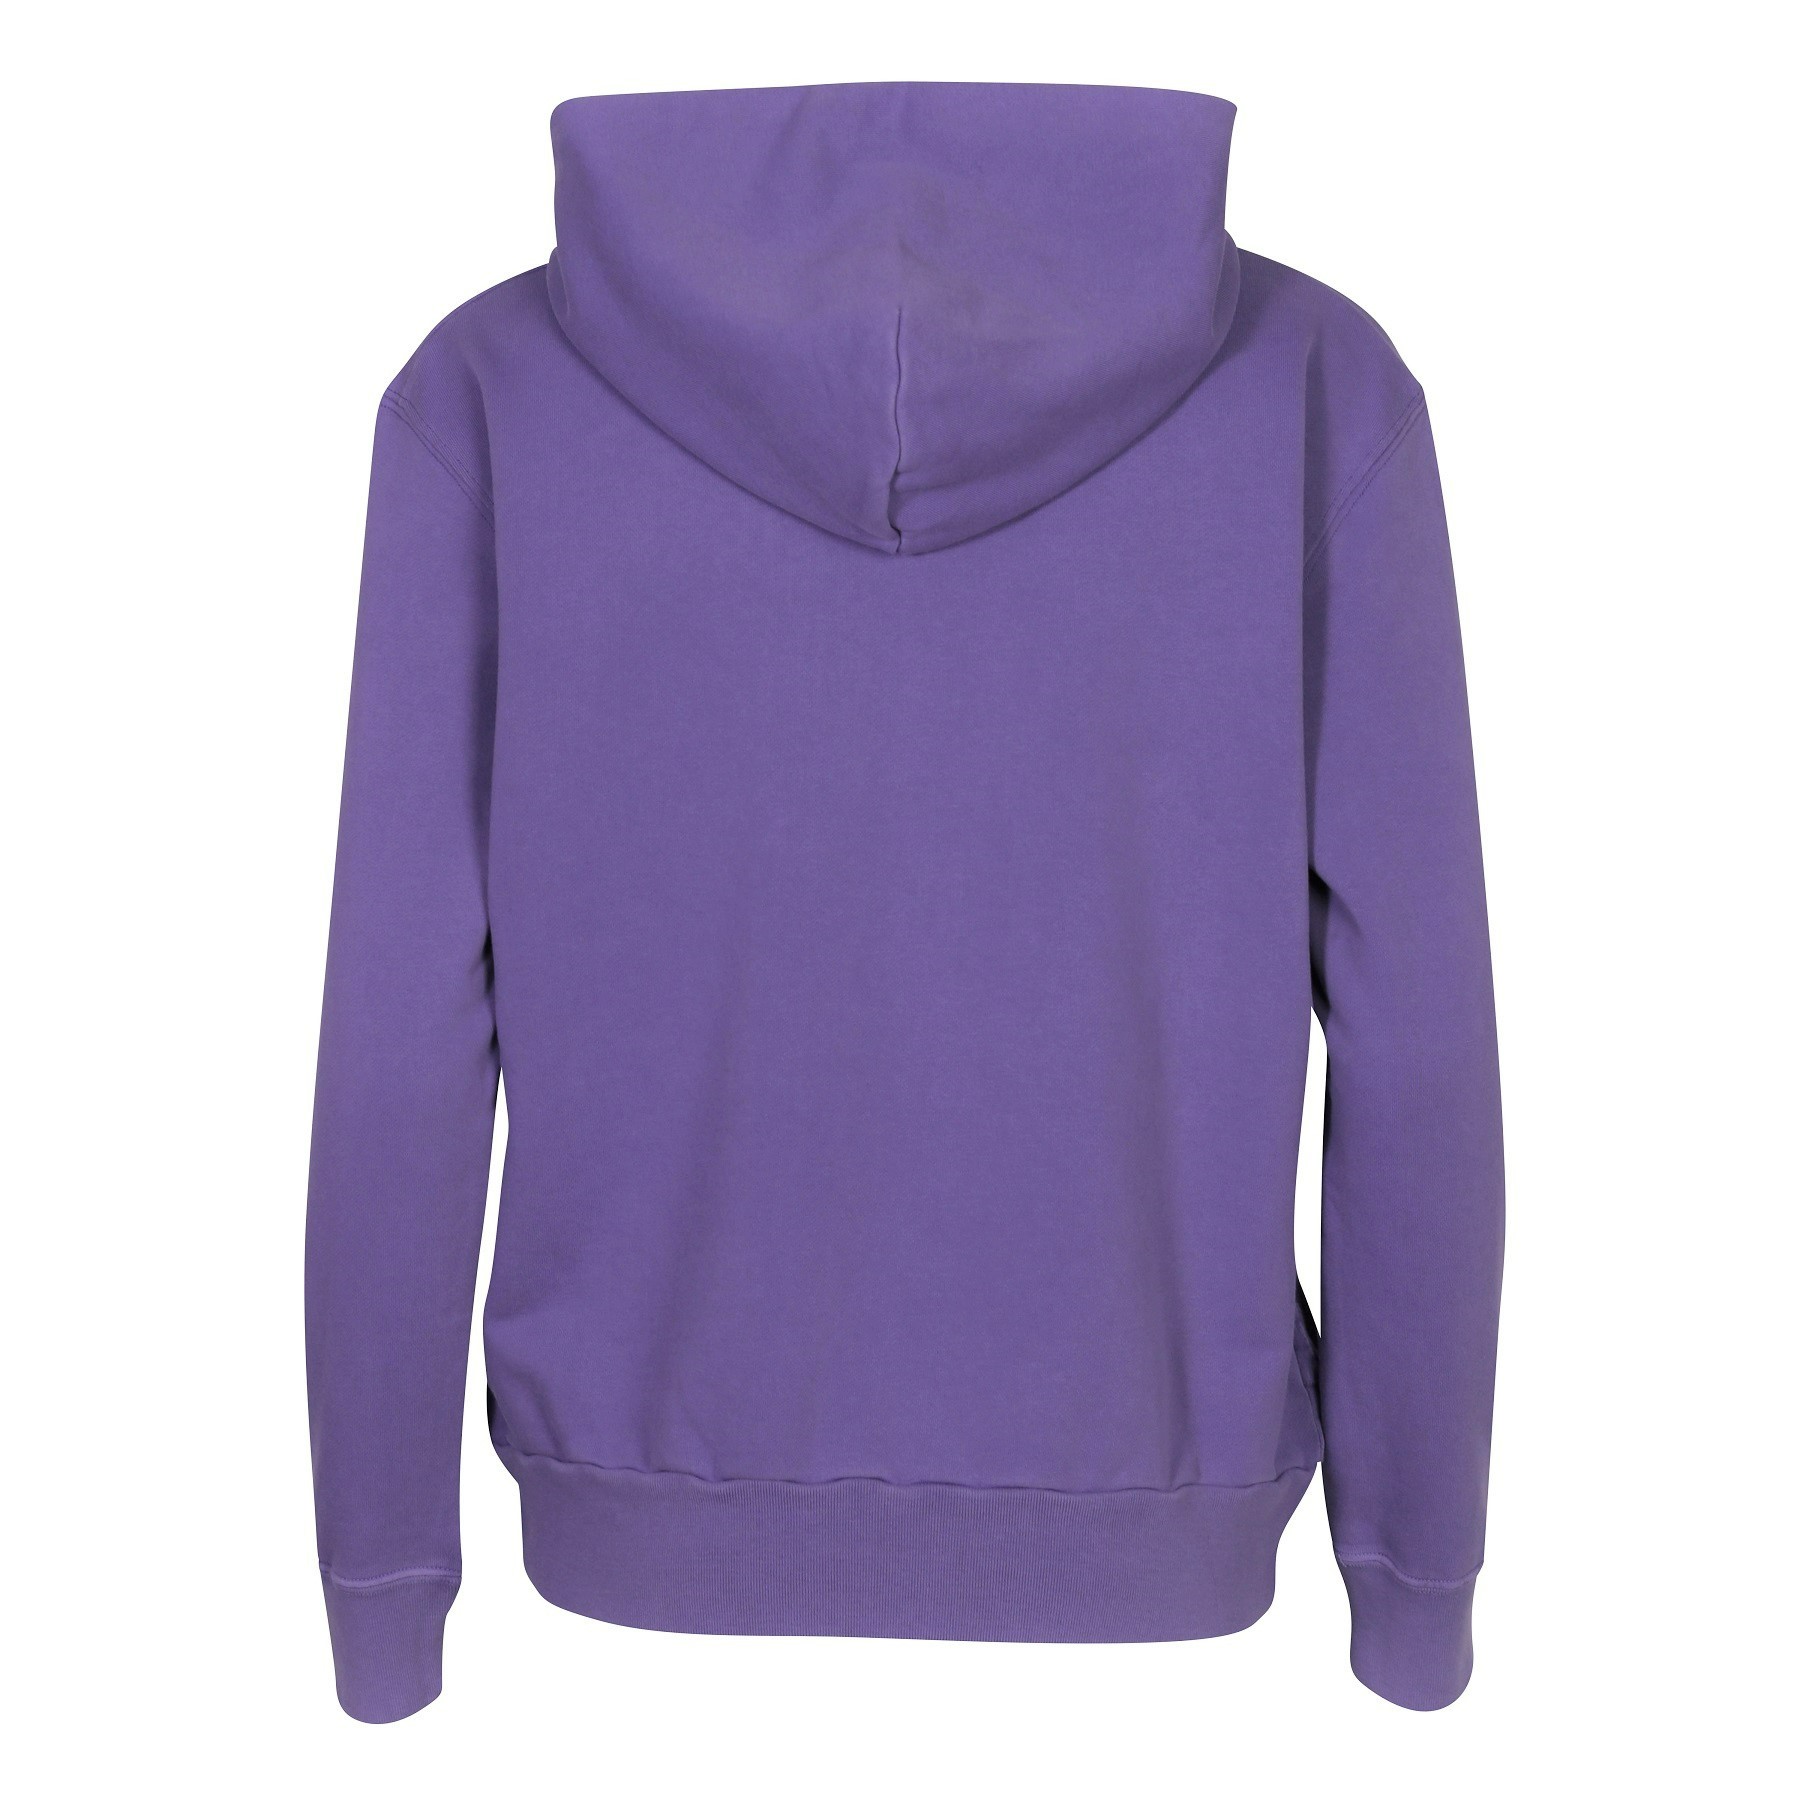 Autry Action Shoes Hoodie Supervintage in Tinto Lilac S